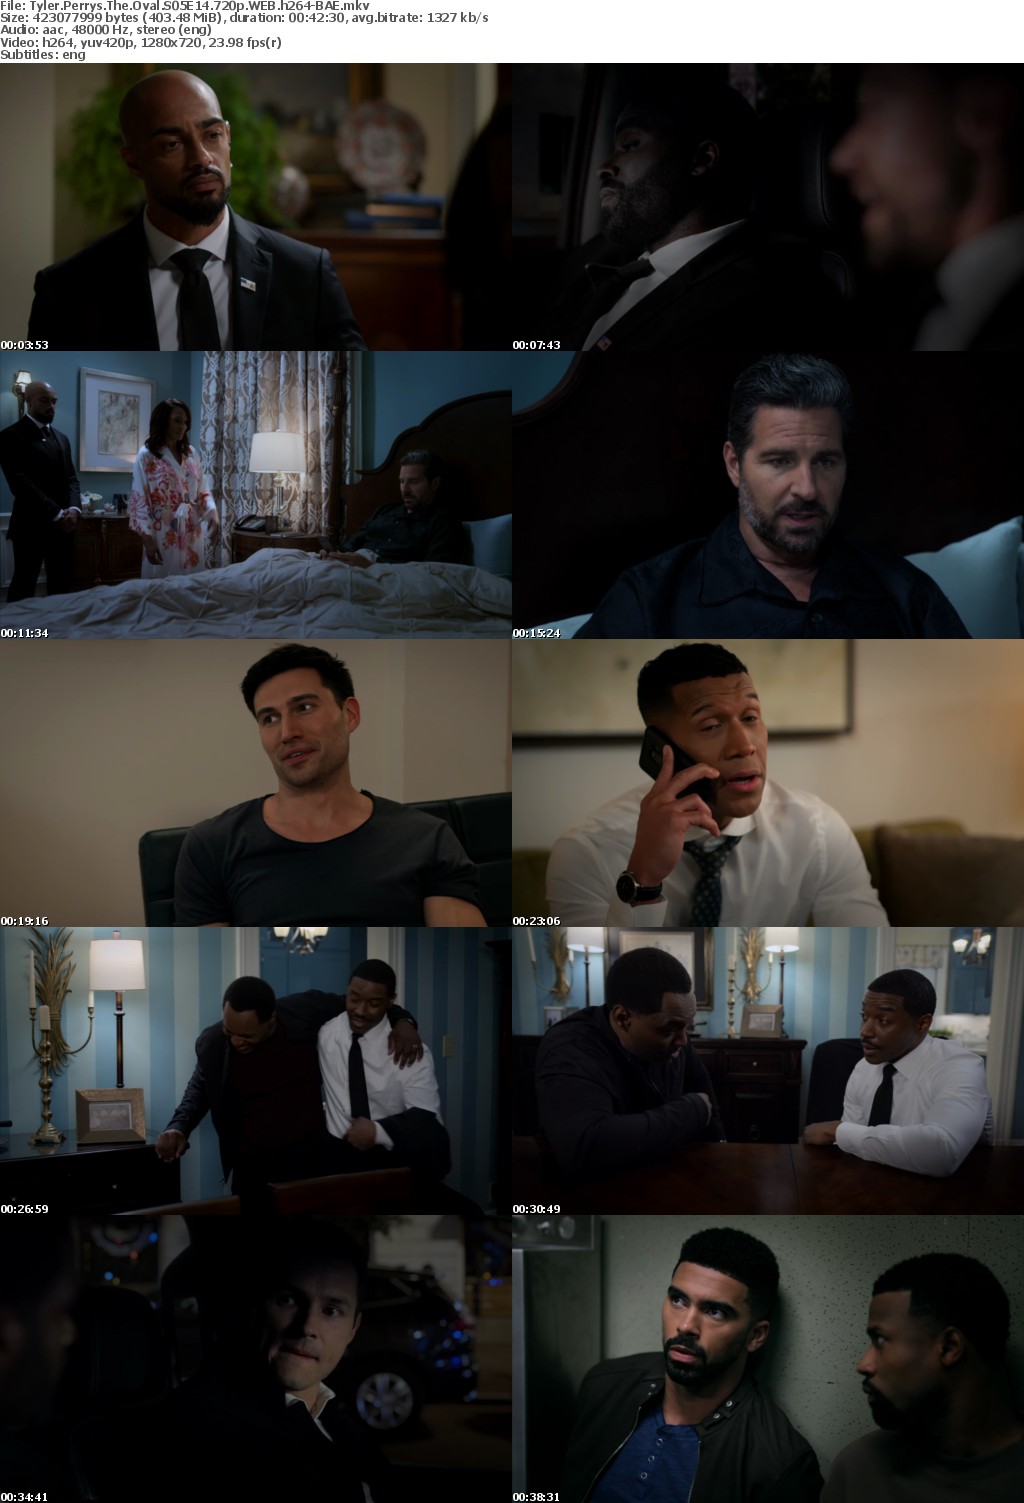 Tyler Perrys The Oval S05E14 720p WEB h264-BAE